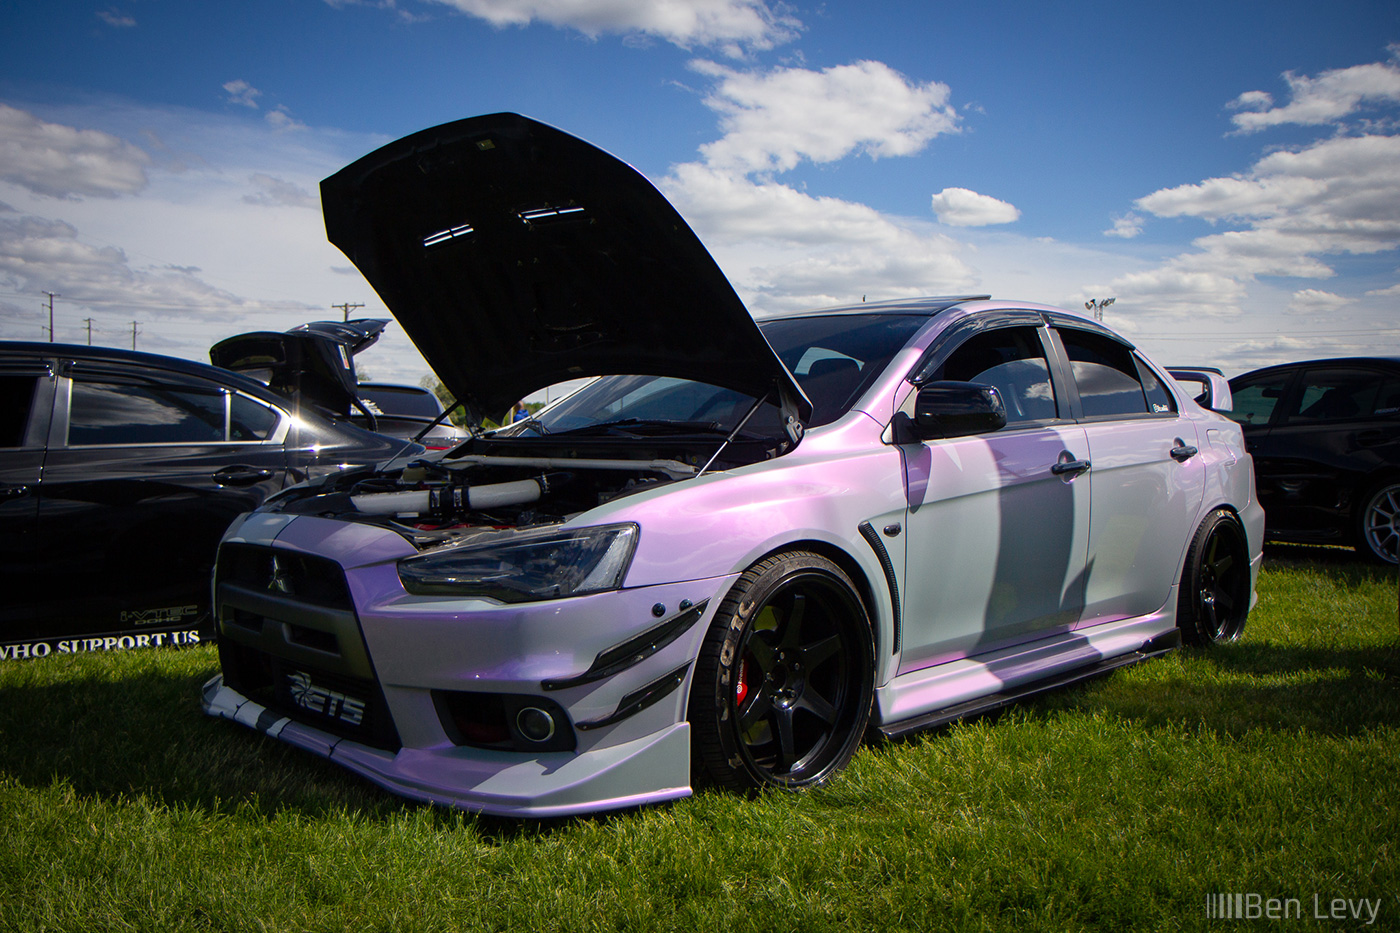 Wrapped Lancer Evo X at Import Face-Off at Rockford